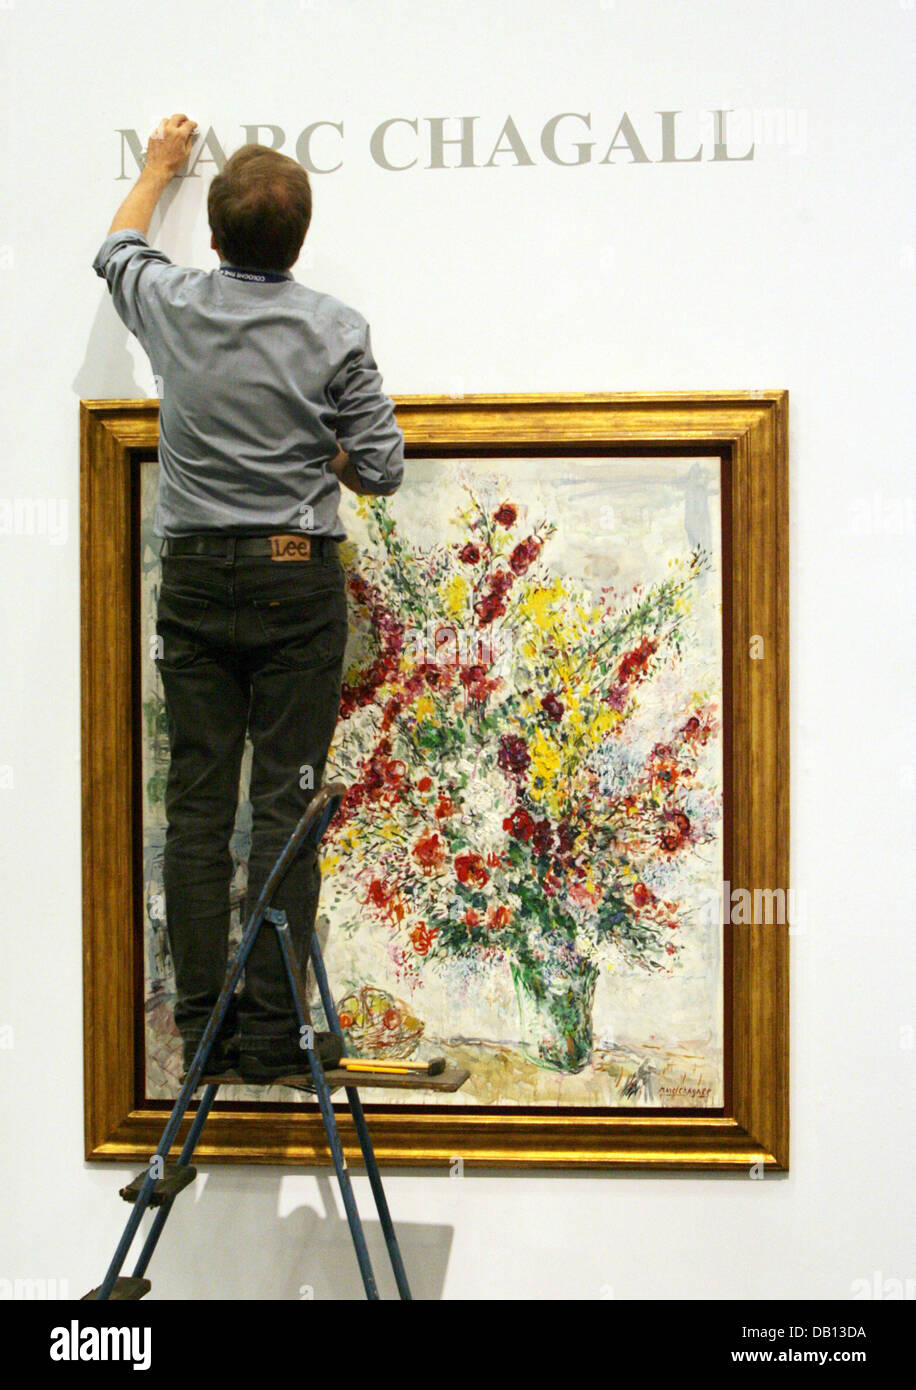 A man puts up the name of painter Marc Chagall above his work 'Bouquet de fleurs et prunes' (1969) at the stand of Frankfurt-based Gallery 'Die Galerie' at the Cologne Fine Arts Trade Fair in Cologne, Germany, 30 October 2007. Some 160 gallery owners, art dealers, and antique dealers will exhibit objects at the art trade fair taking place from 31 October to 04 November 2007 in Colo Stock Photo